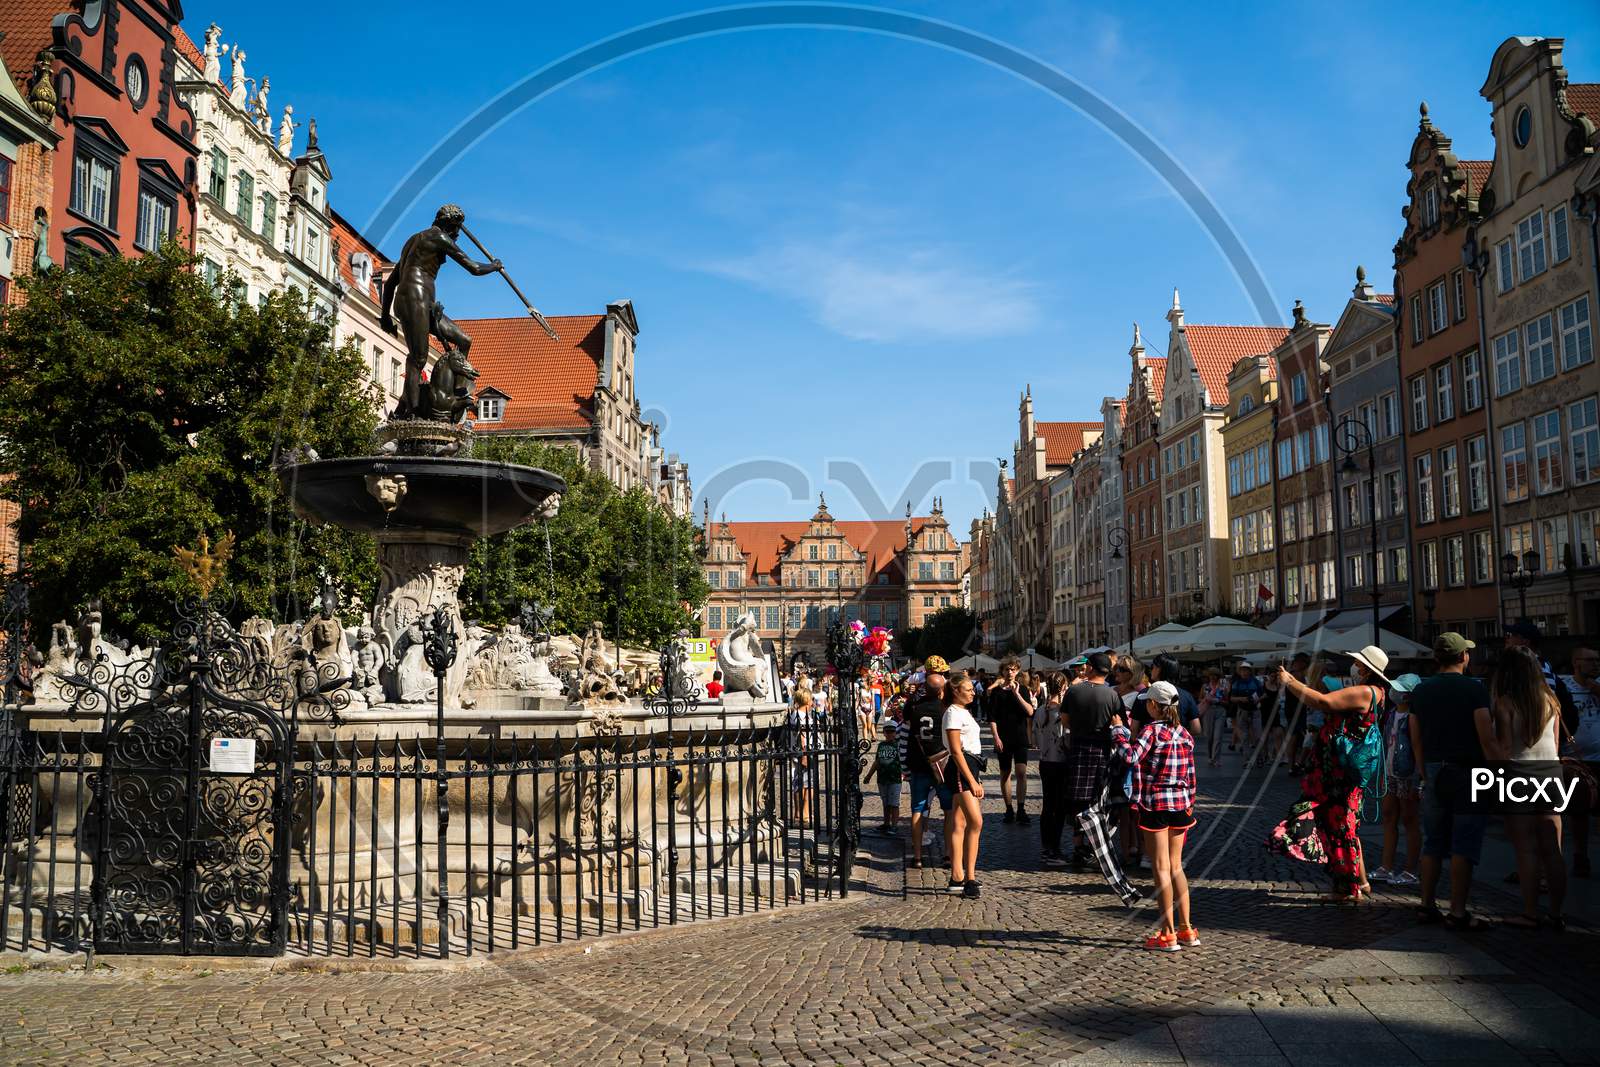 Gdansk, North Poland - August 13, 2020: People Taking Pictures Next To Neptune'S Fountain Touristic Spot In Main Square City Center During Covid 19